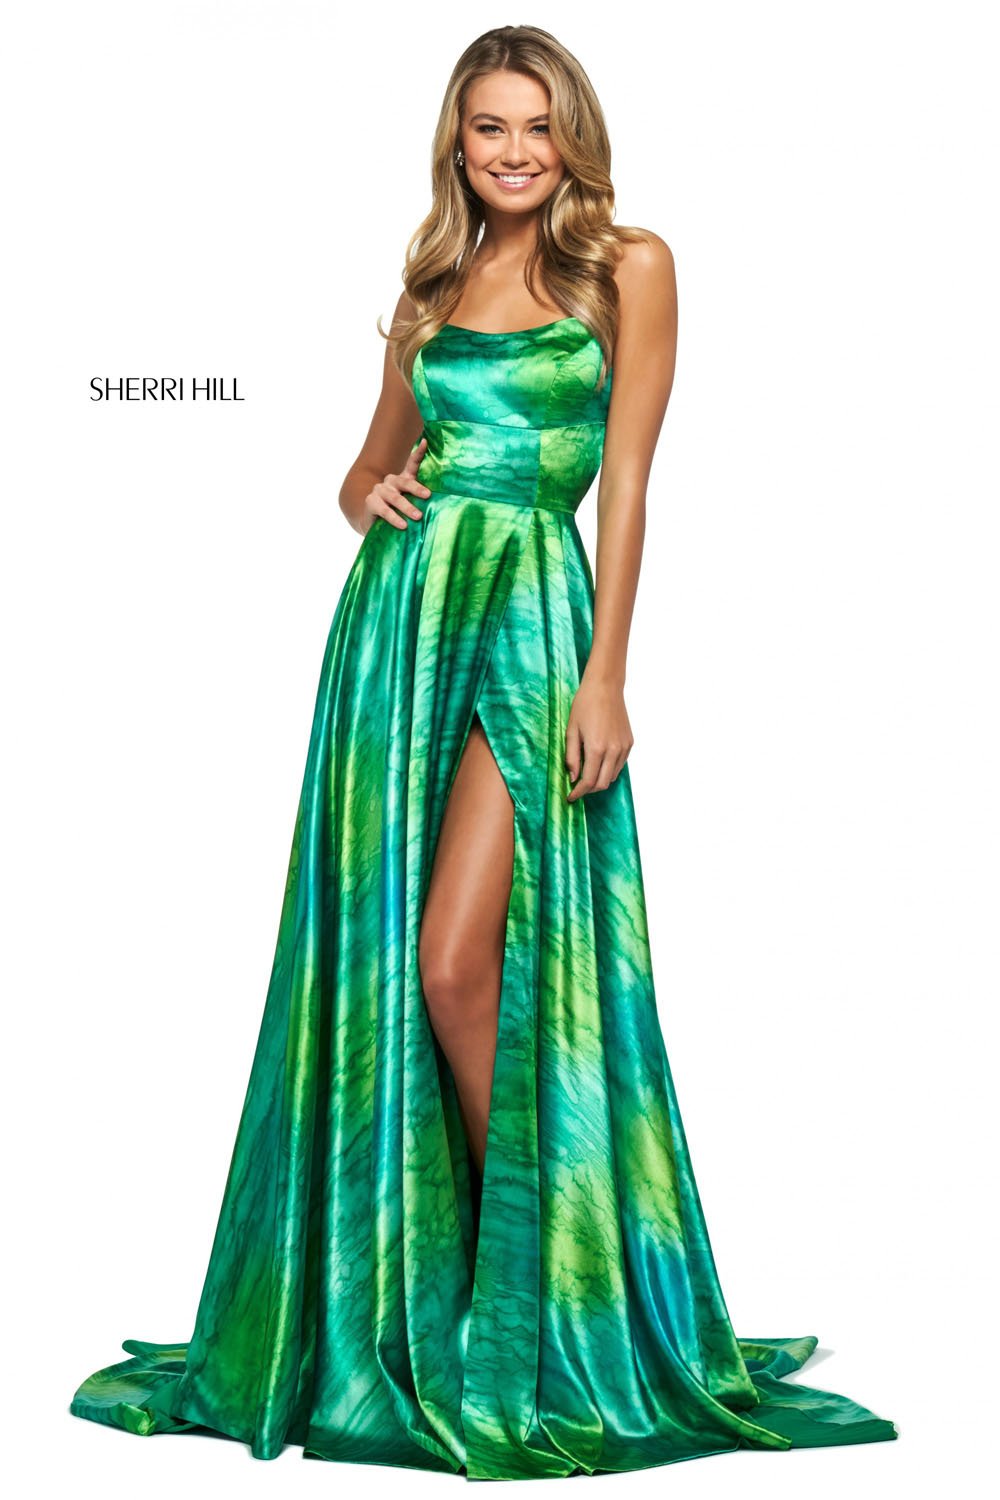 Sherri Hill 53888 dress images in these colors: Green Print.